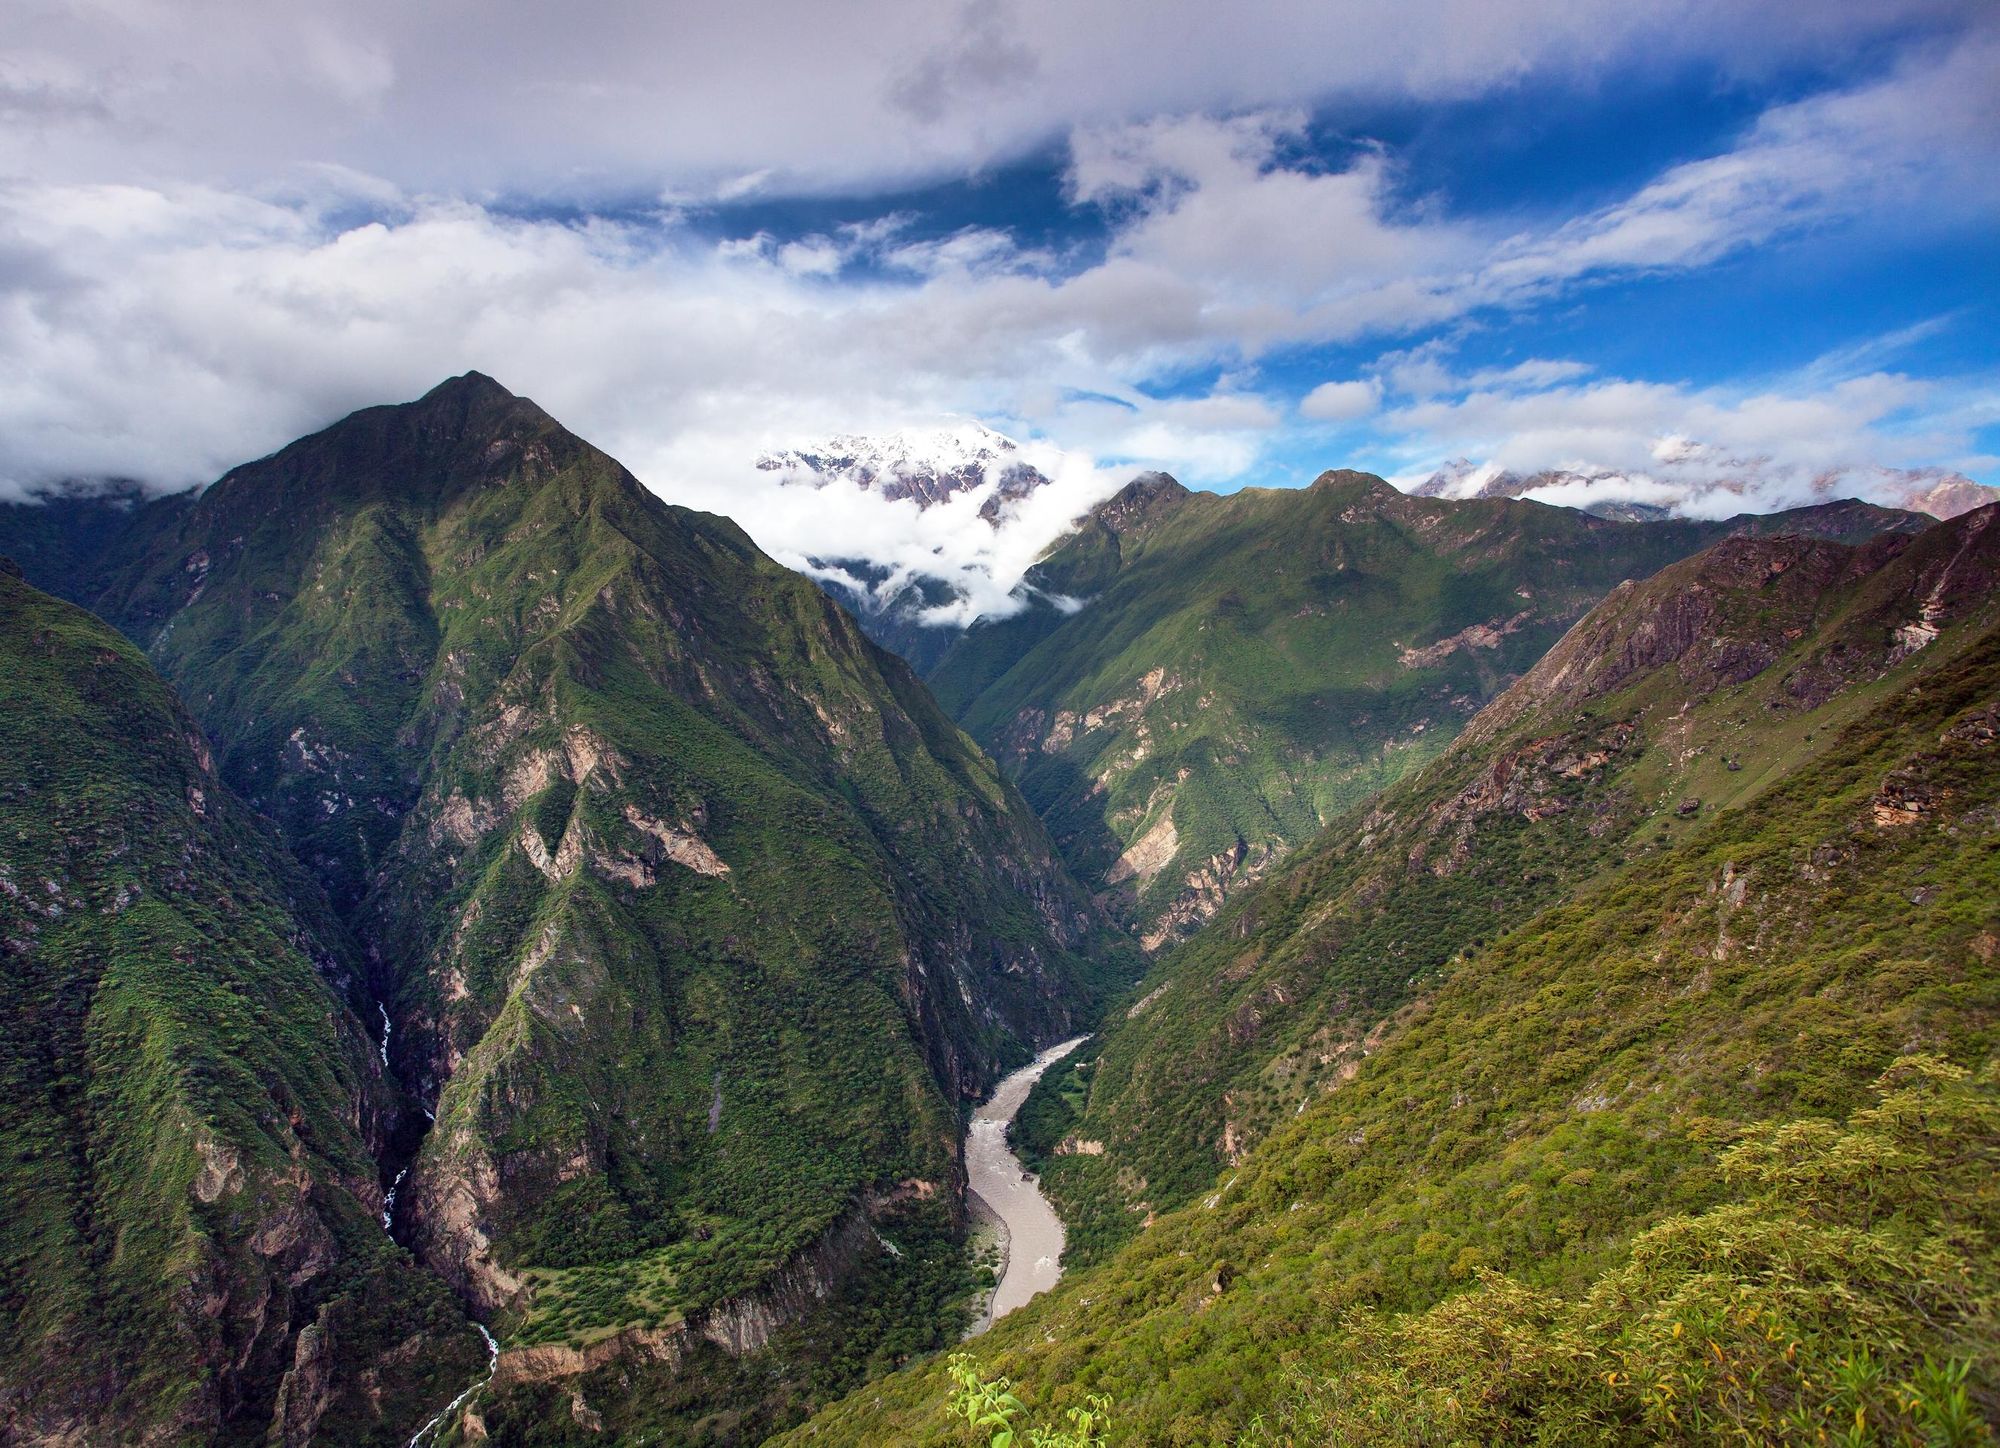 The Rio Apurimac as seen from the Choquequirao trekking trail in the Peruvian Andes. Photo: Getty